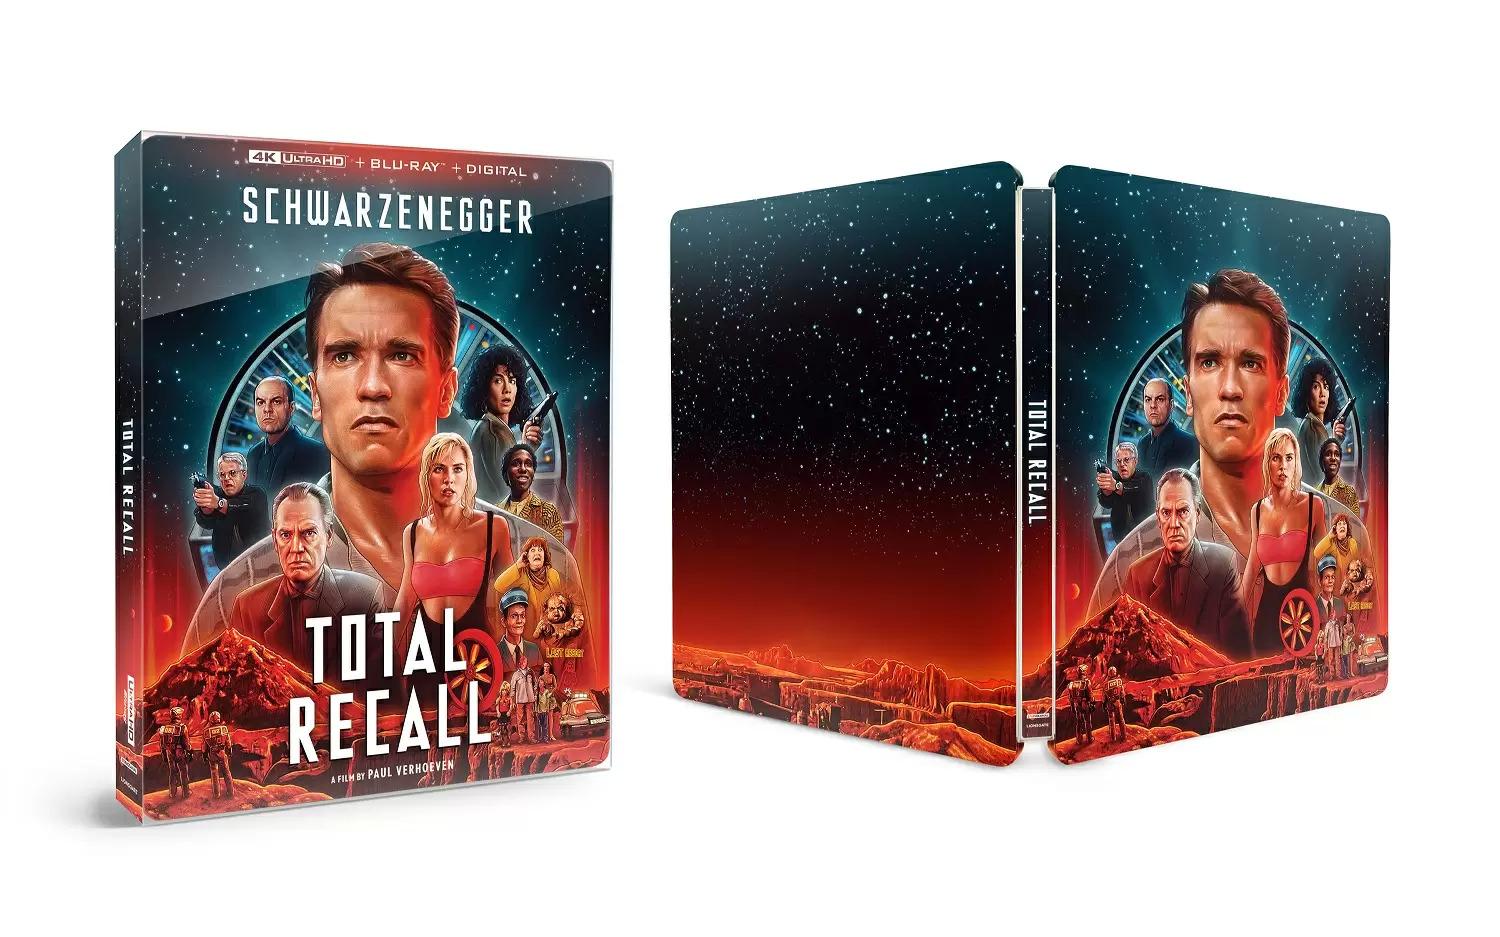 Total Recall 30th Anniversary Blu-ray for $19.99